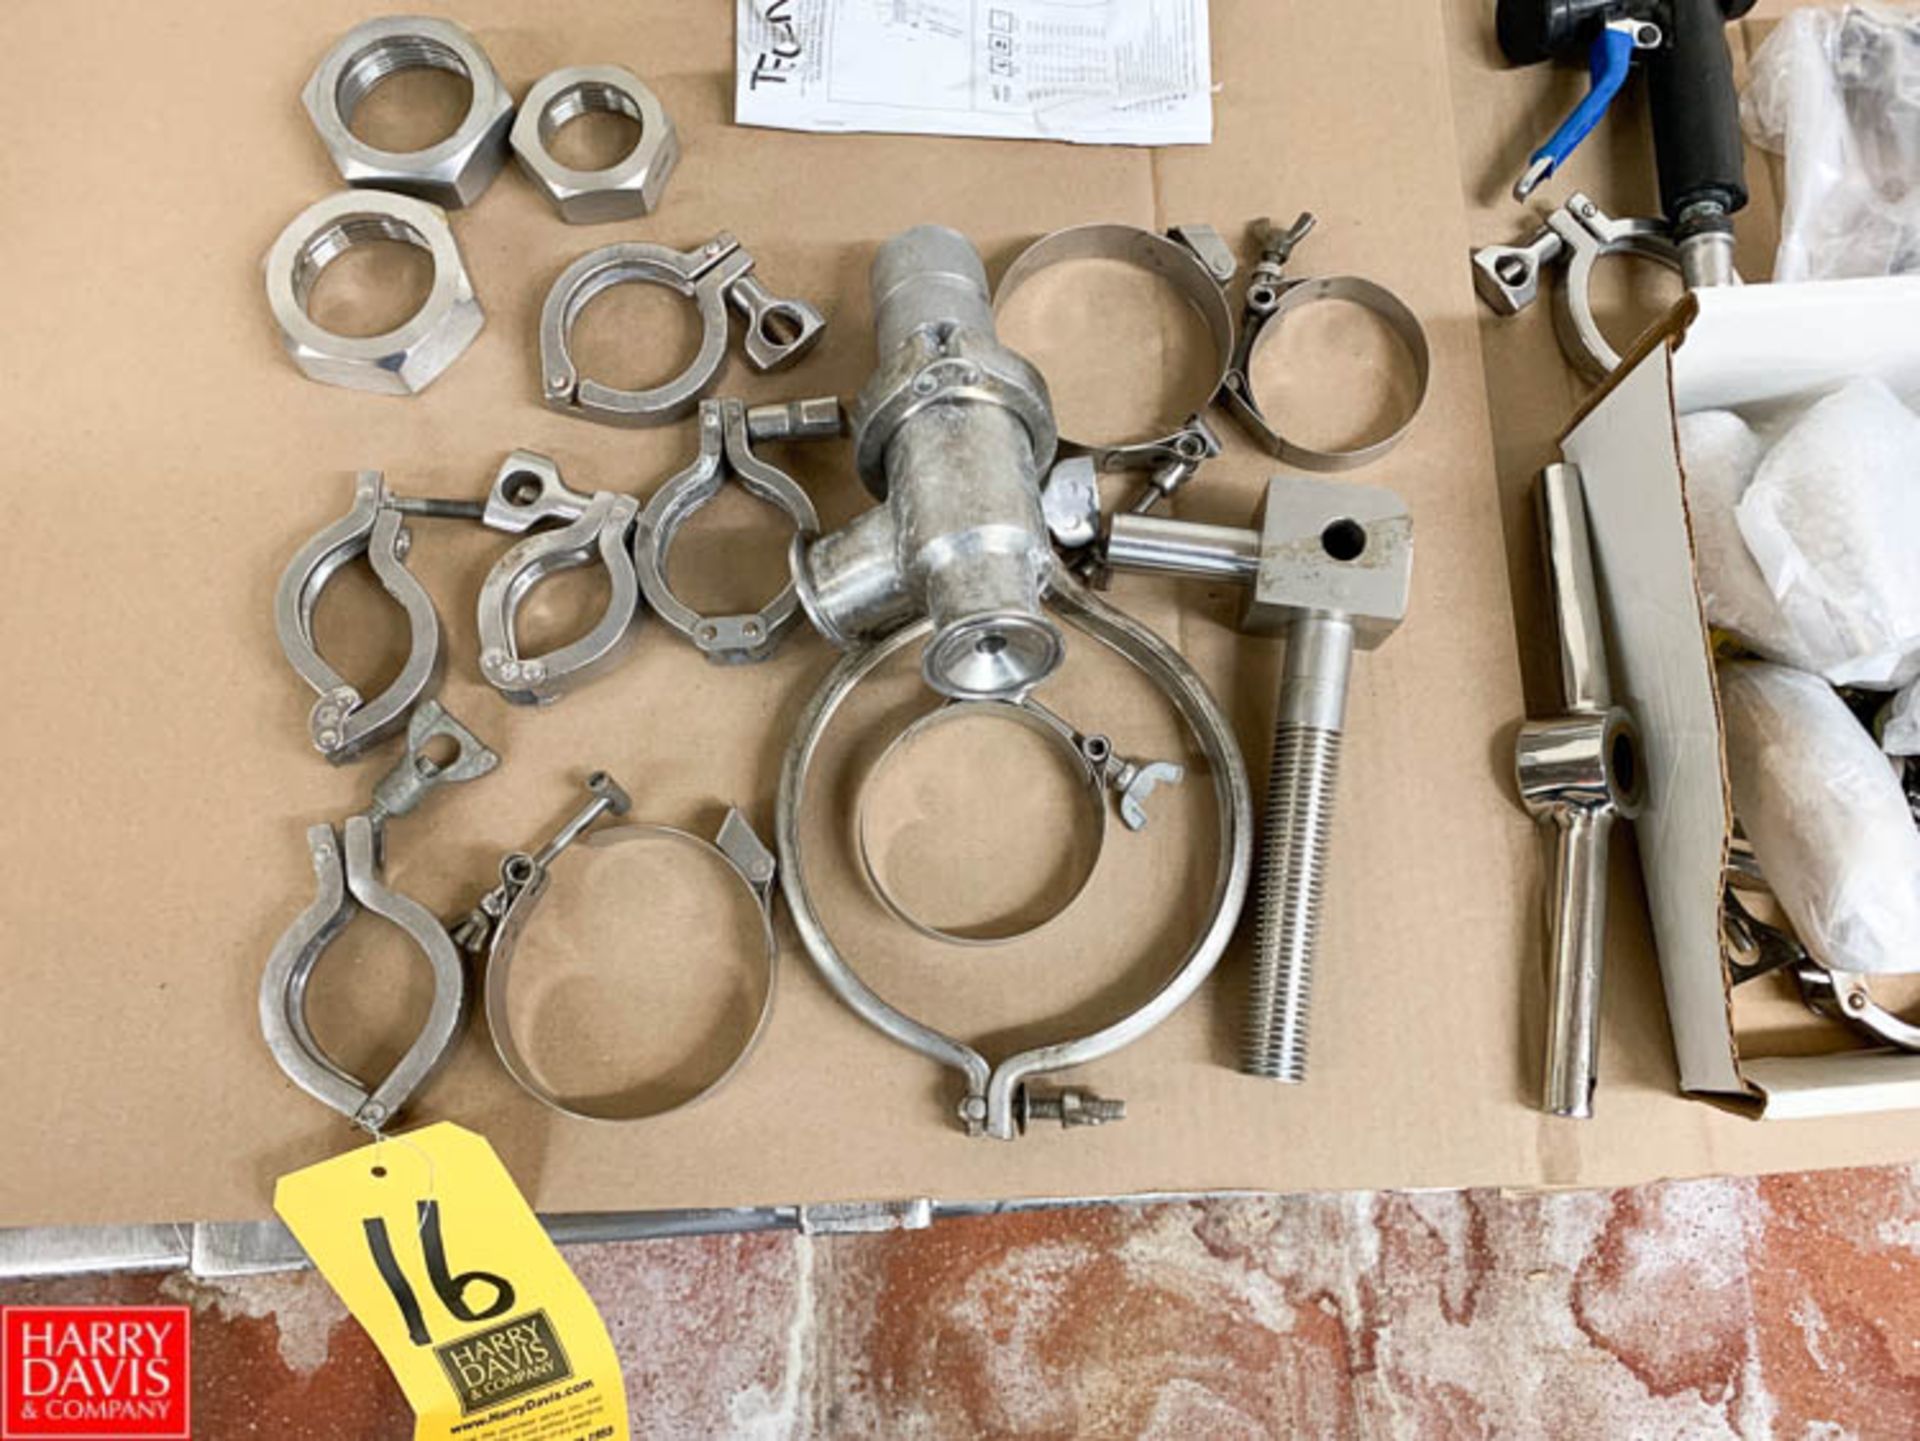 S/S Metering Valve, 1.5" , S/S Clamps, S/S Tank Door Parts, and Hose Nozzles - Rigging Fee: $ 35